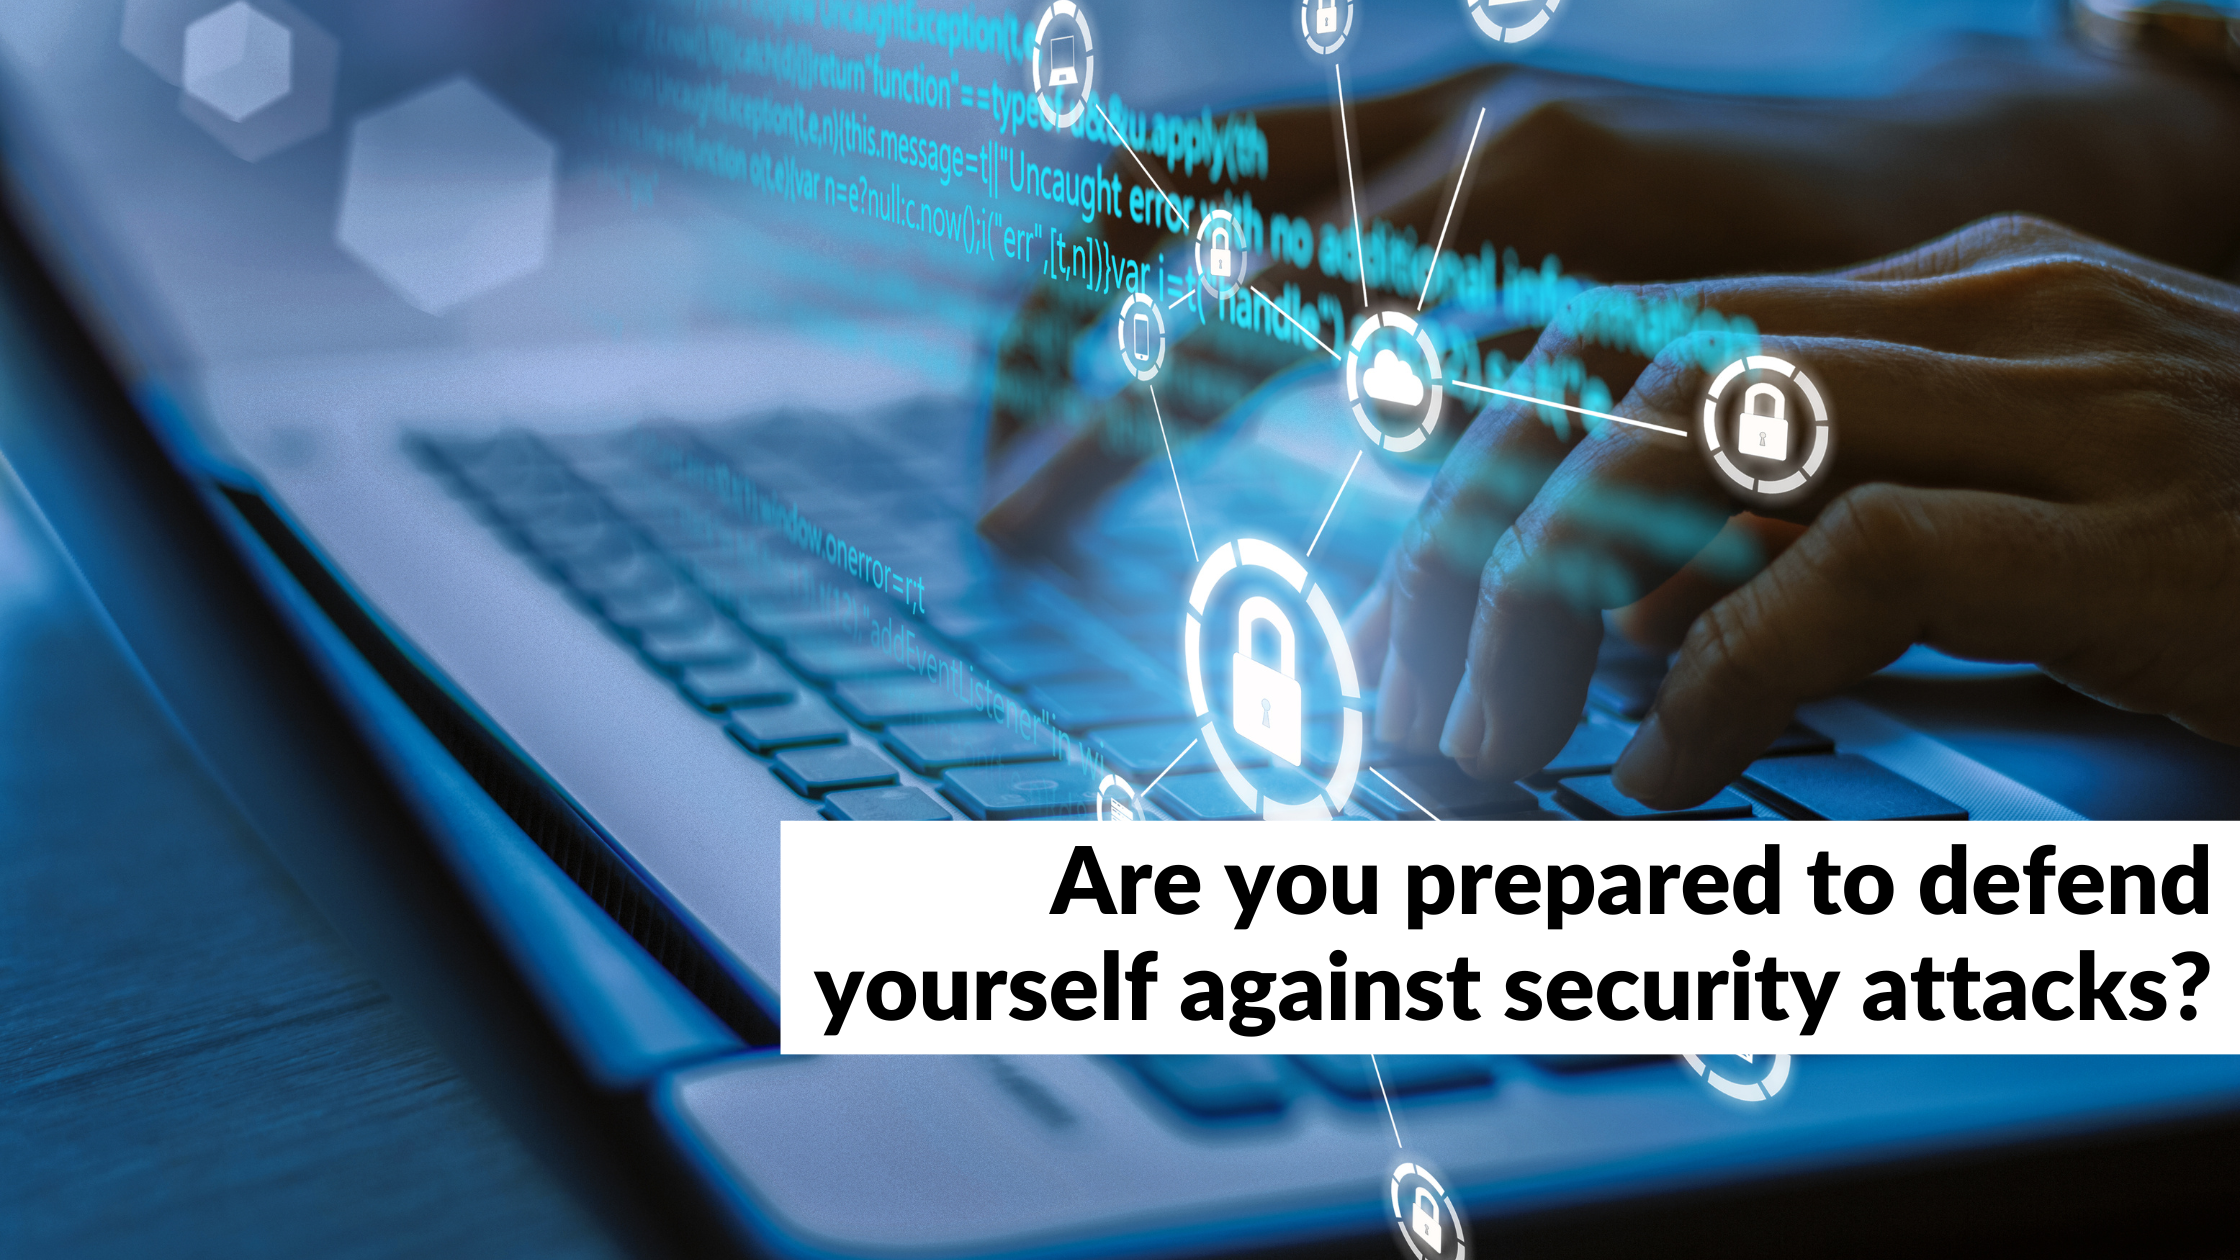 Are you prepared to defend yourself against security attacks?